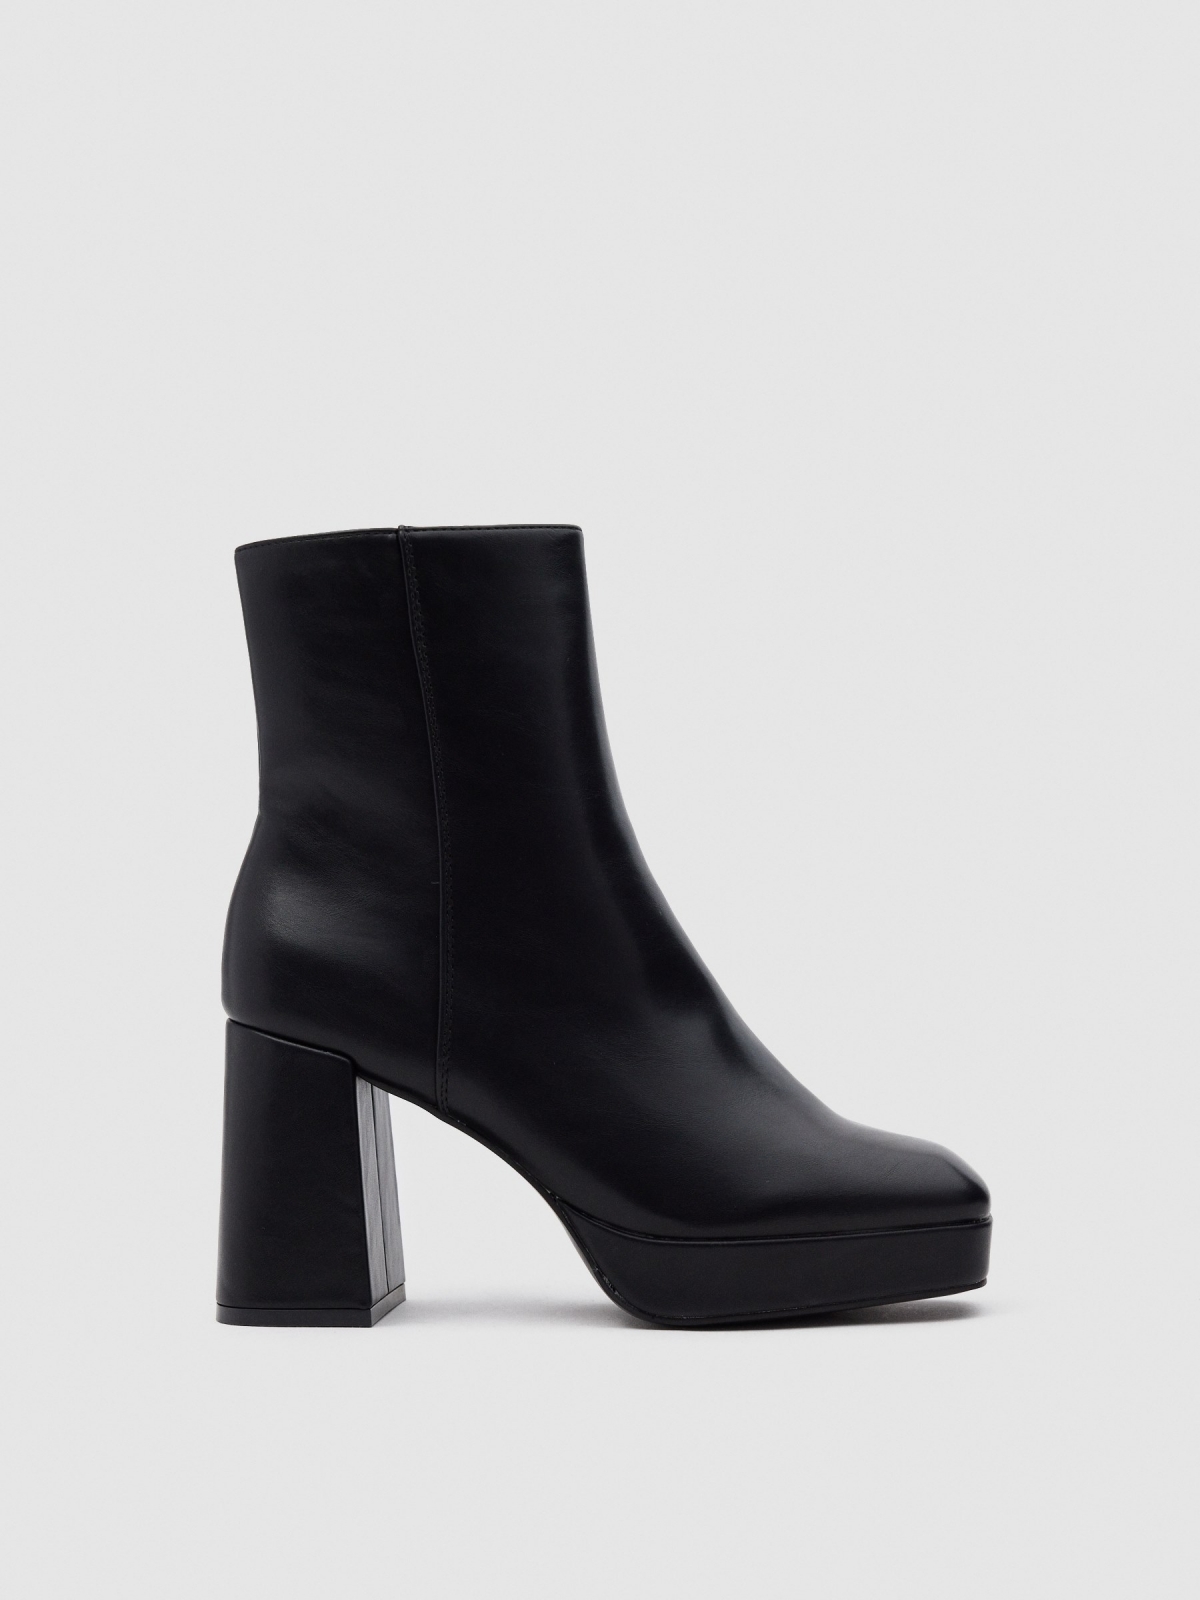 Square toe ankle boots black